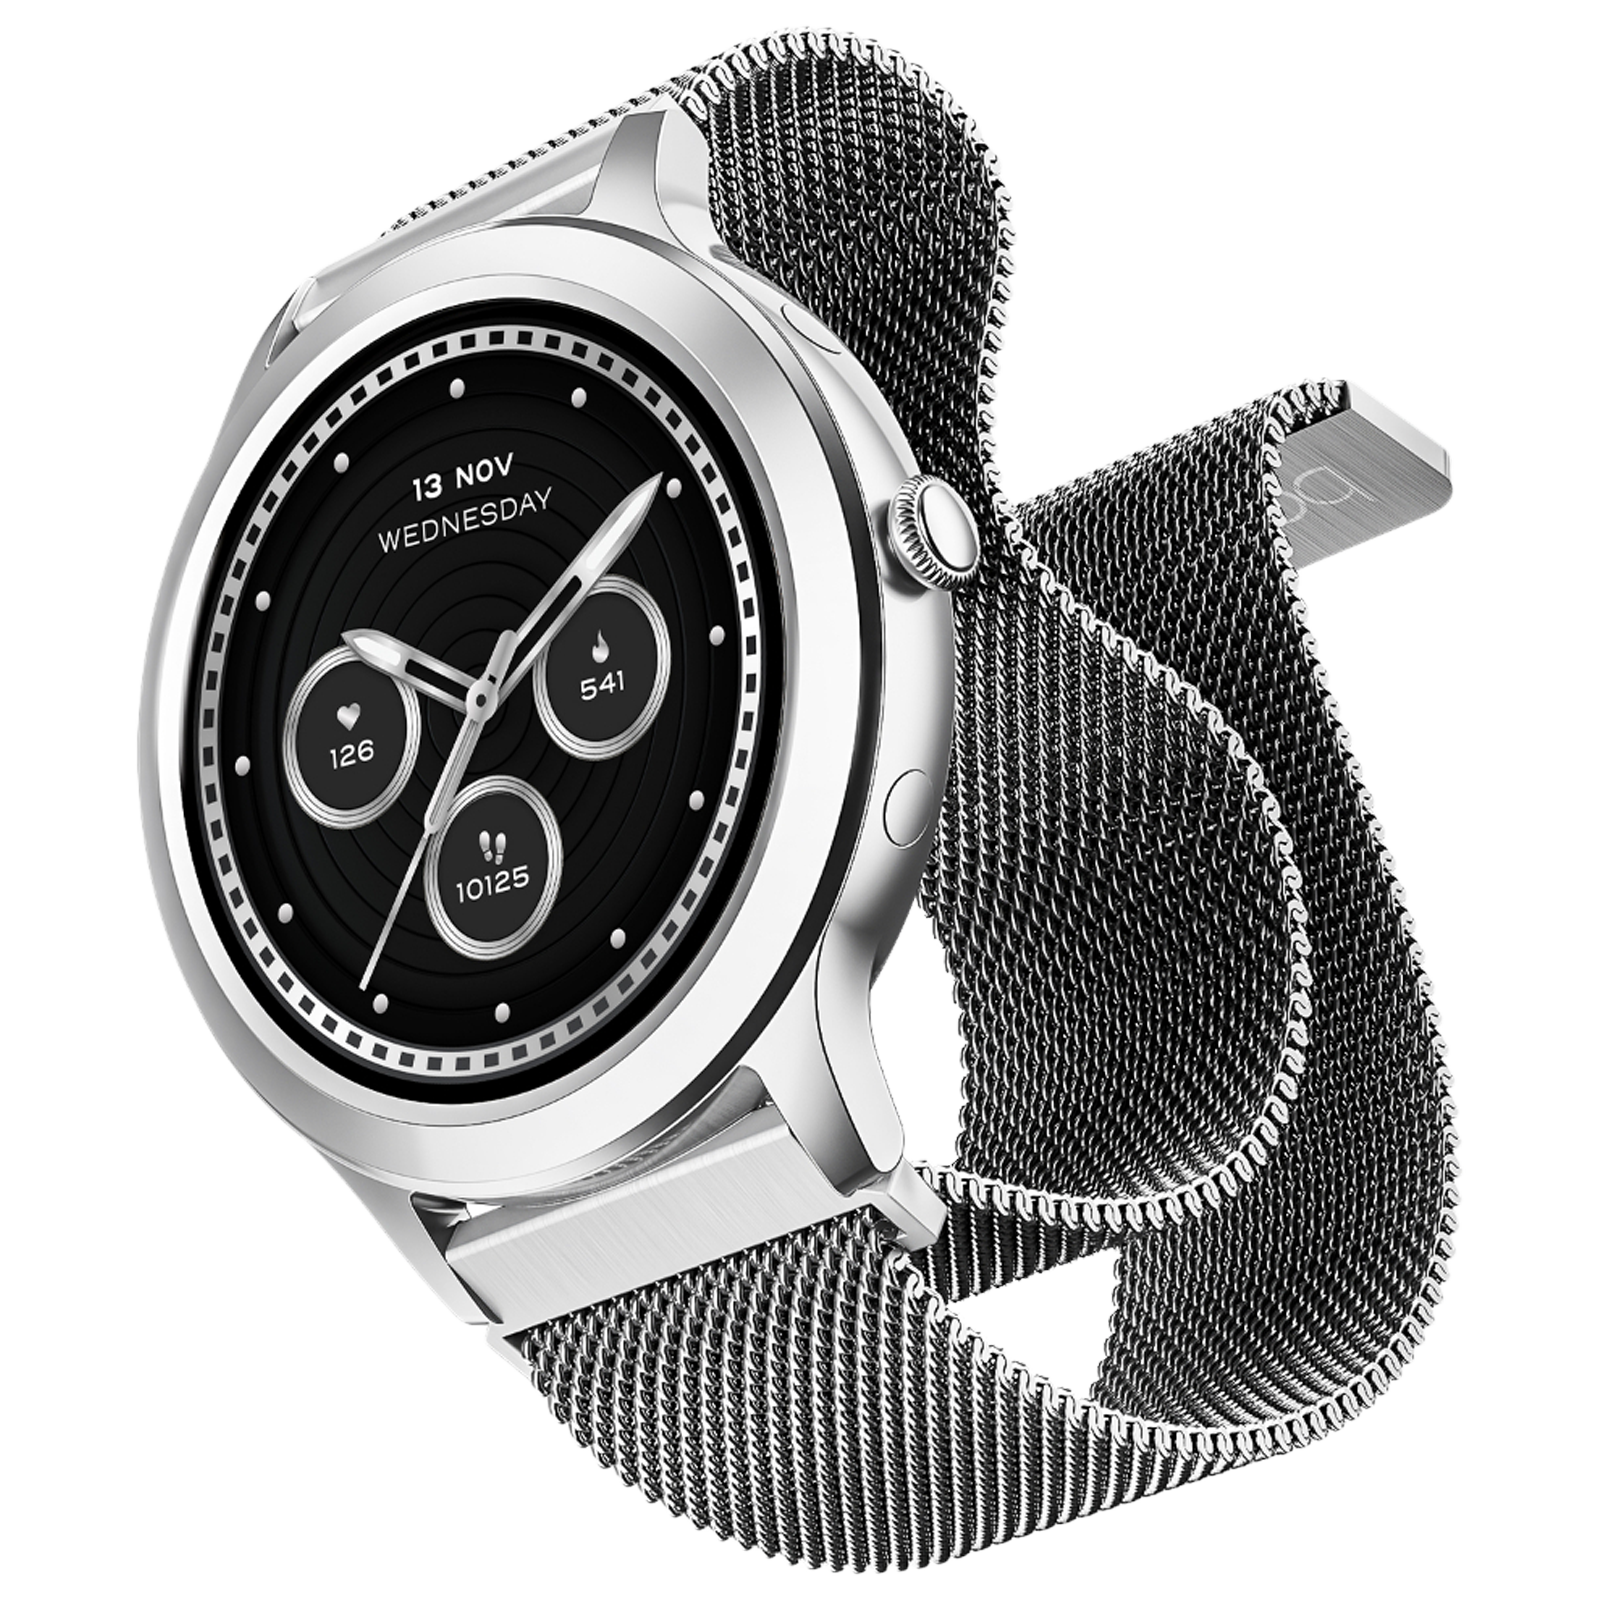 boAt Enigma R32 Smartwatch with Bluetooth Calling (33.5mm TFT AMOLED Display, IP67 Sweat Resistant, Classic Silver Strap)